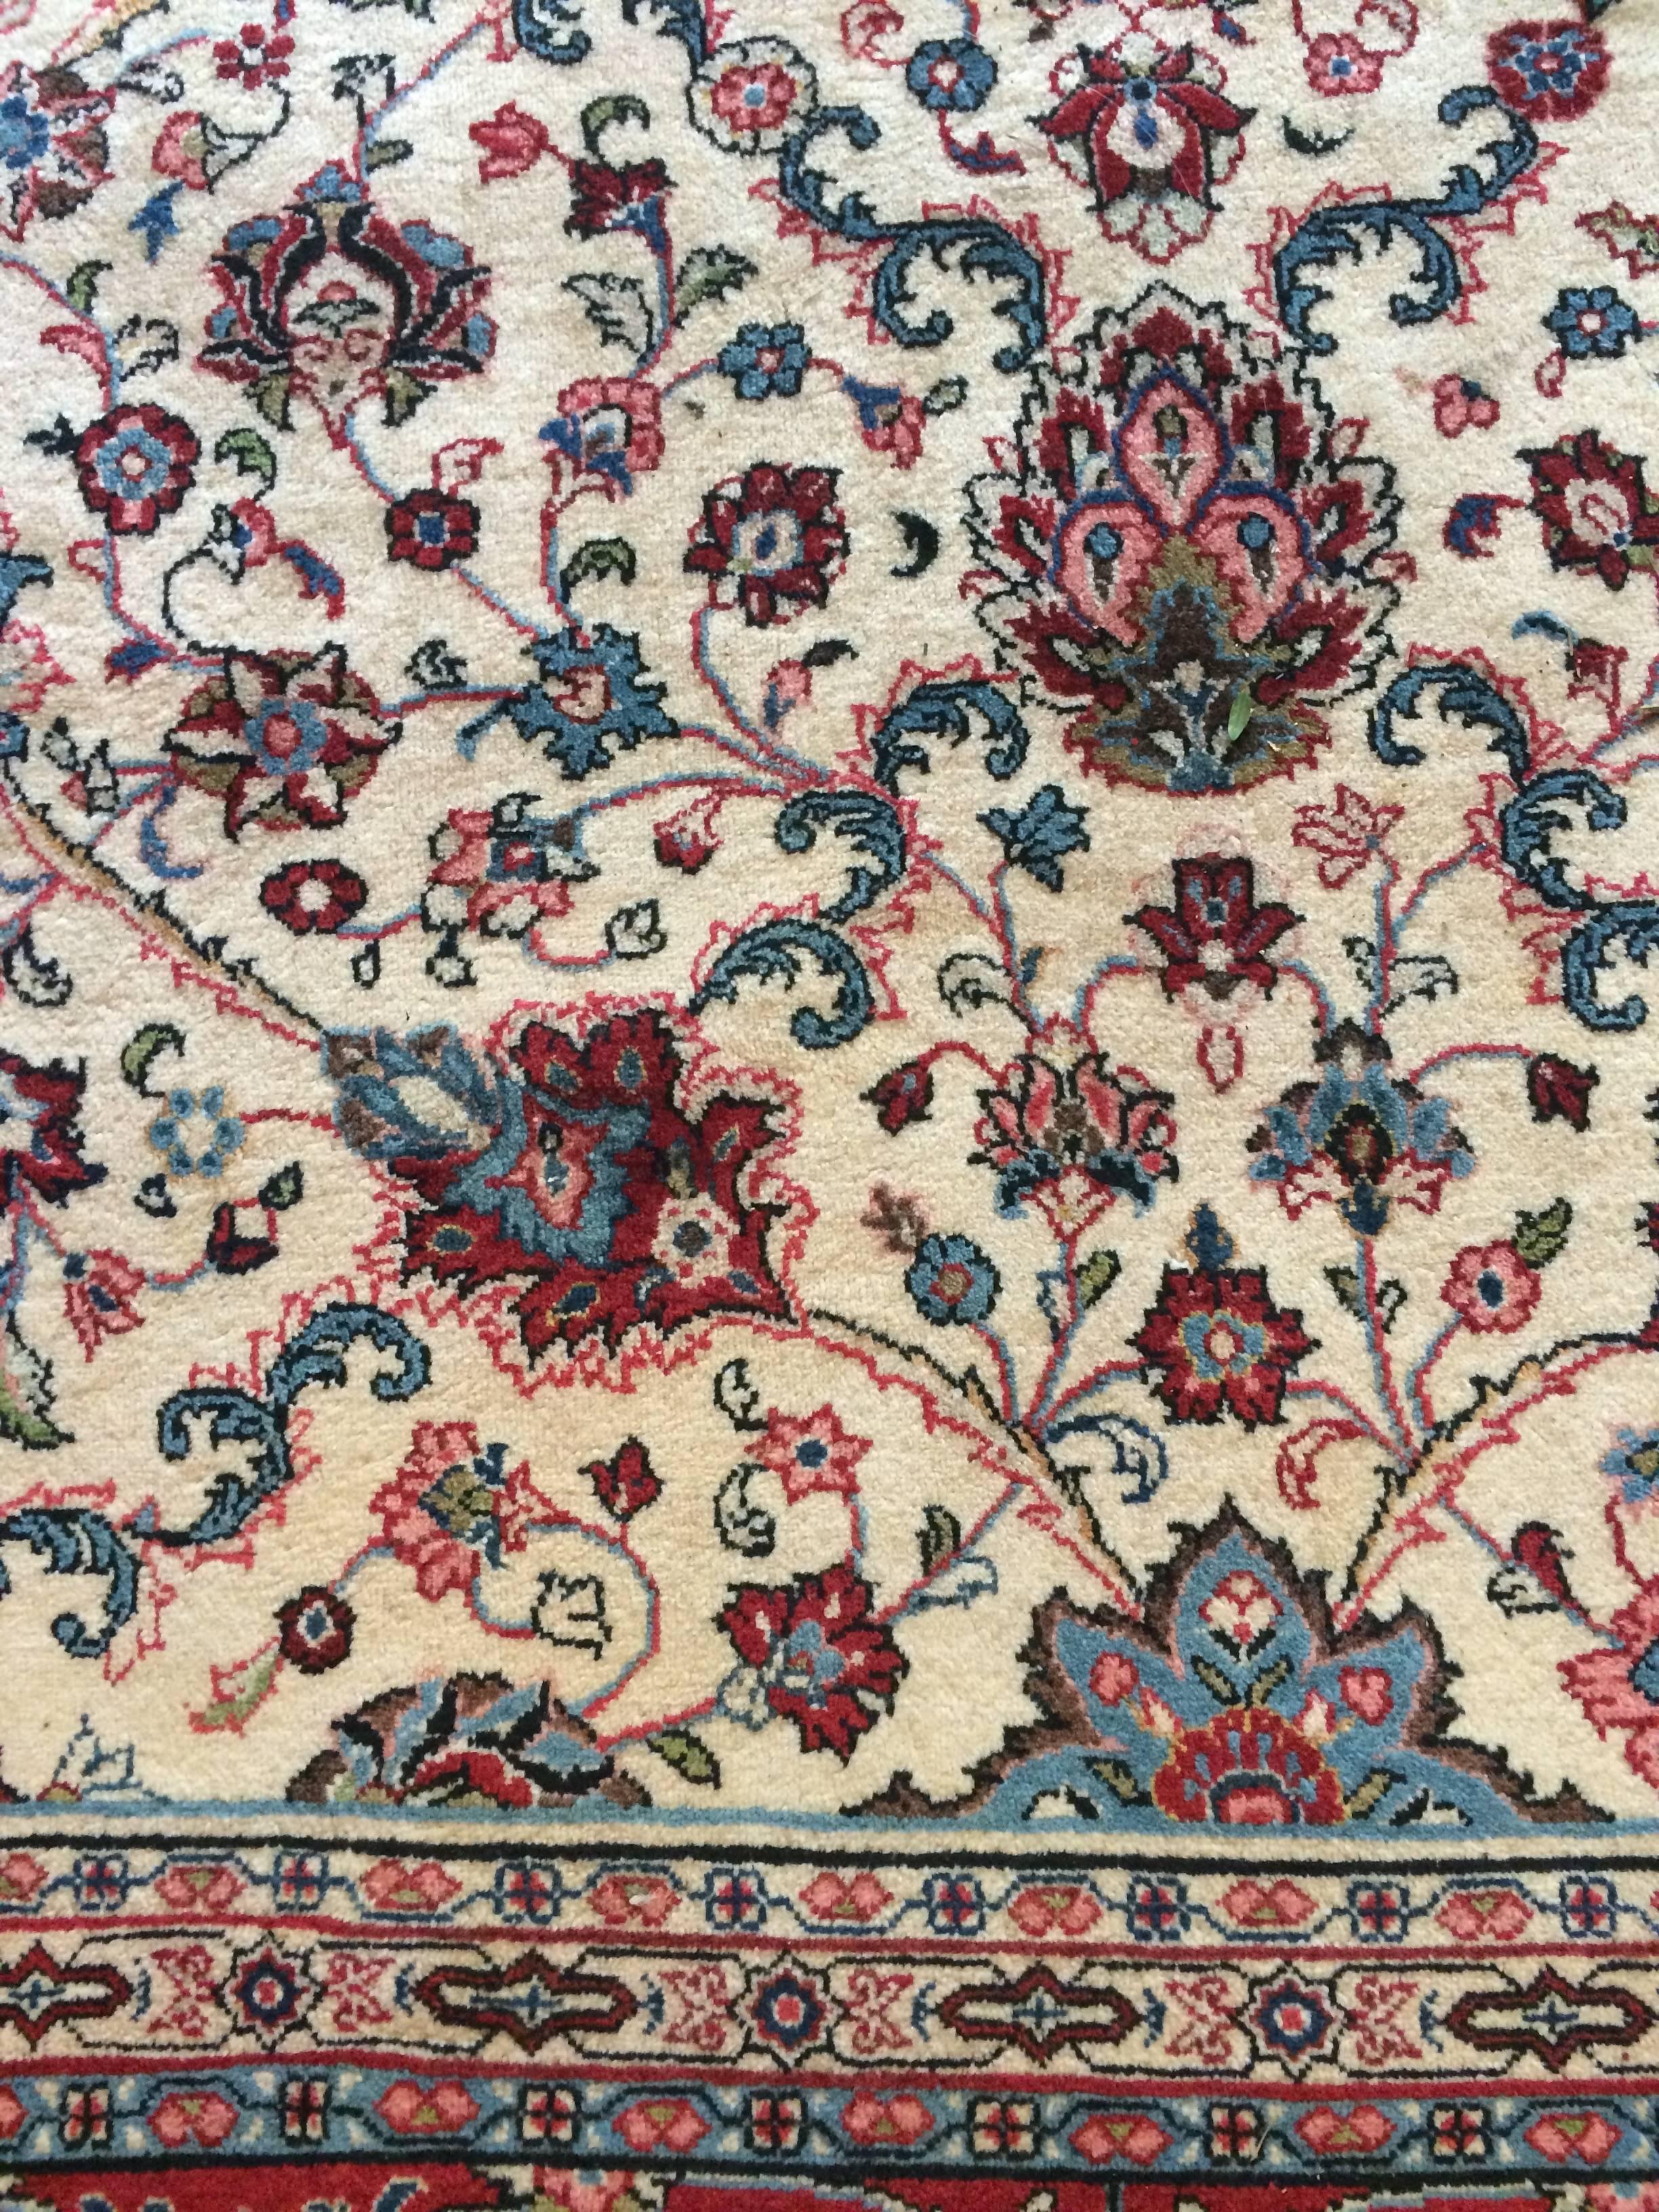 Sumptuous Large Isfahan Pakistani Rug in Jewel Tones 3